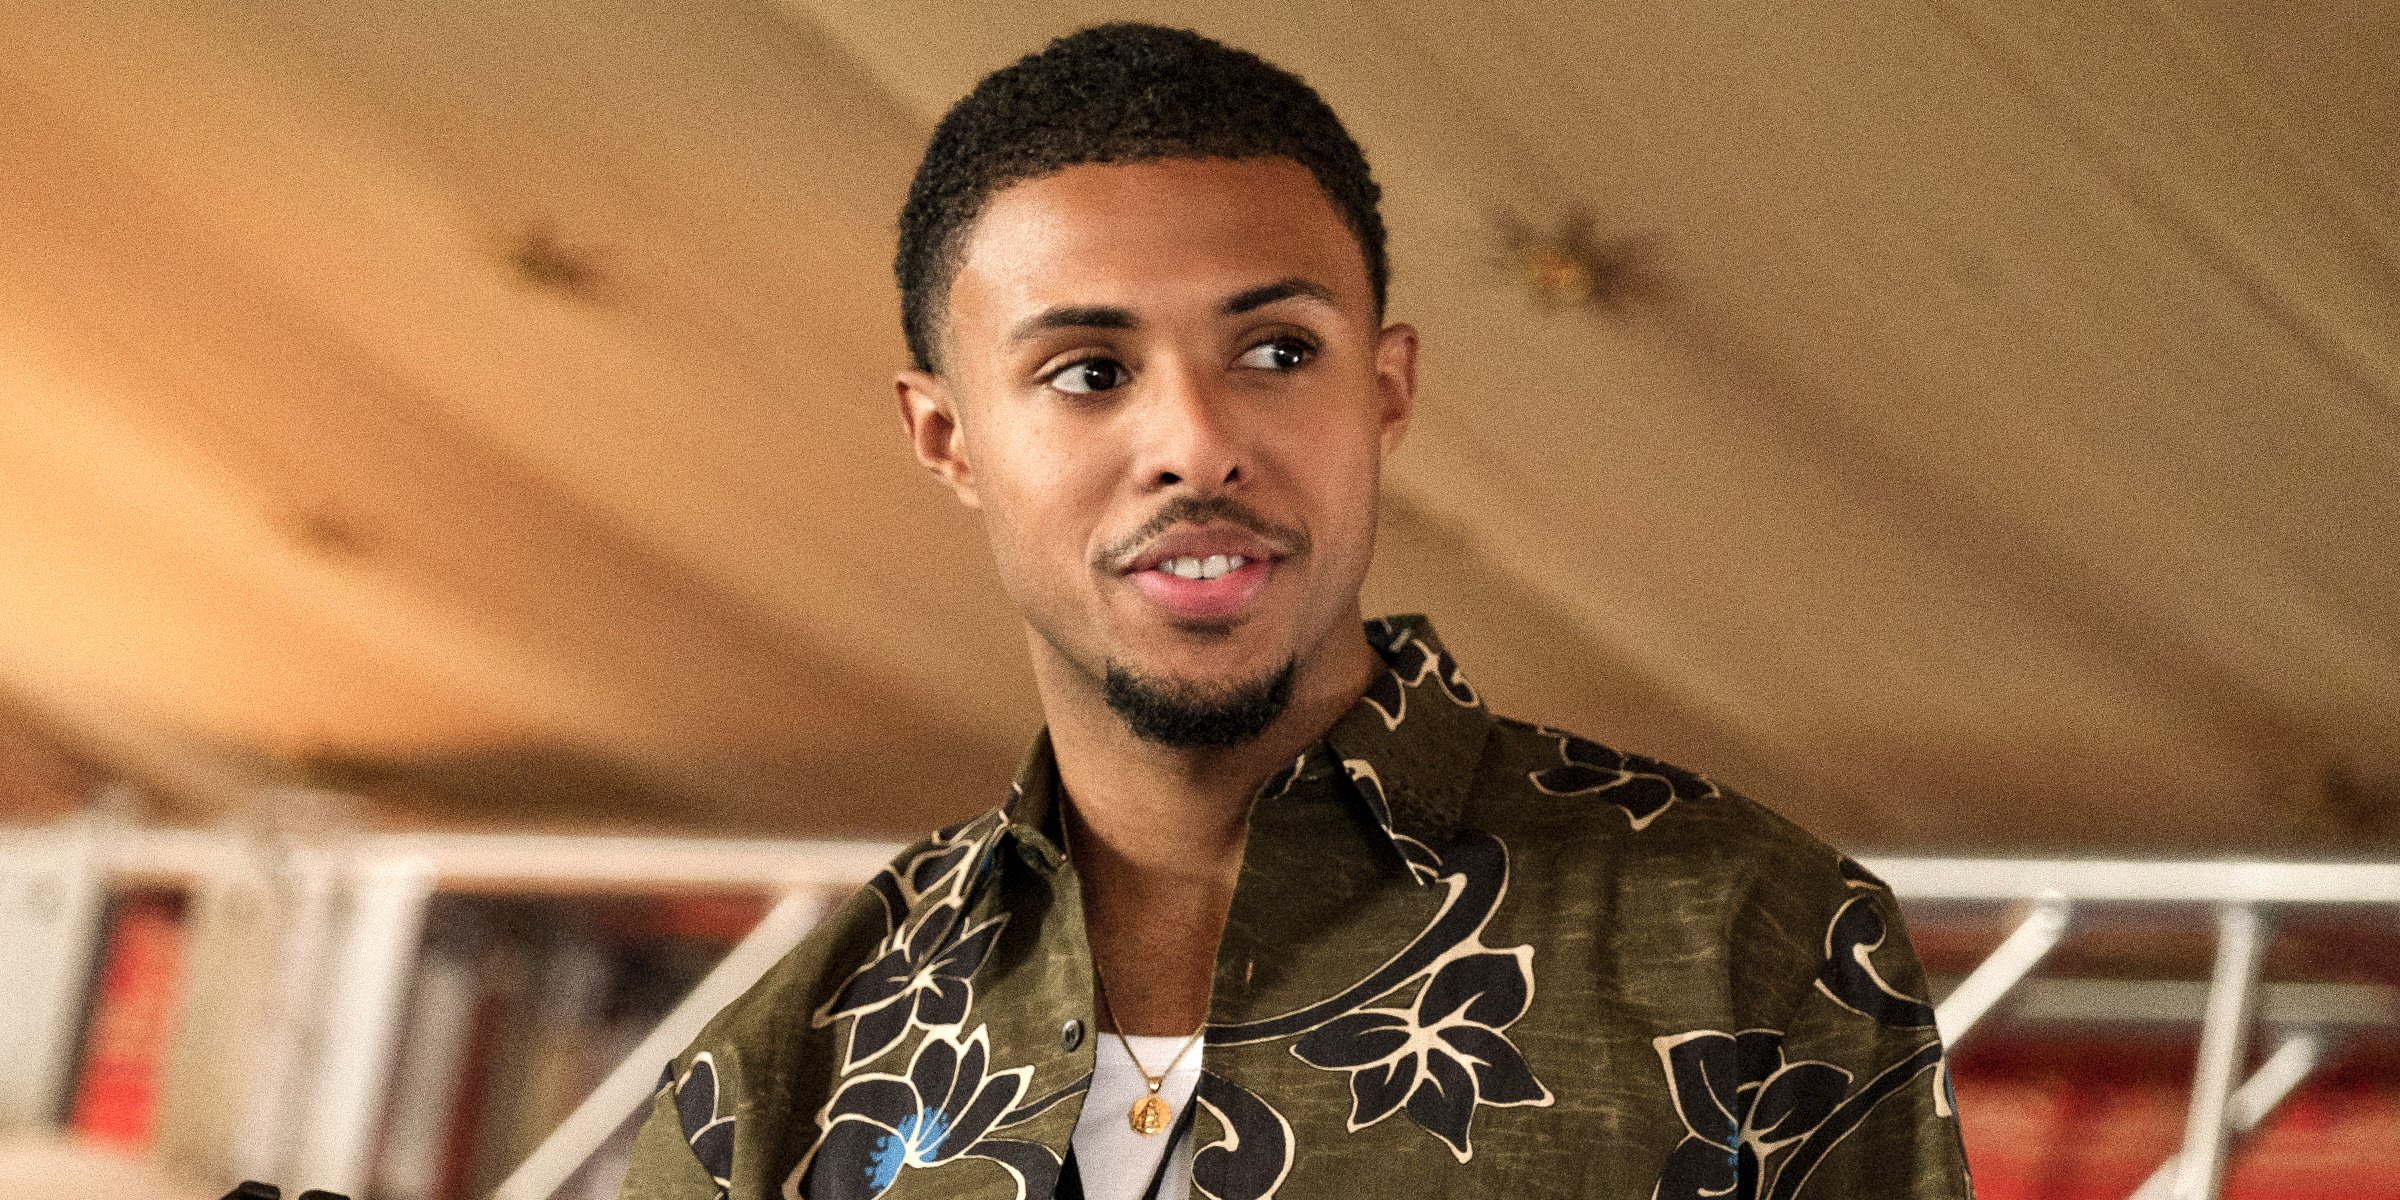 Diggy Simmons. | Source: Getty Images